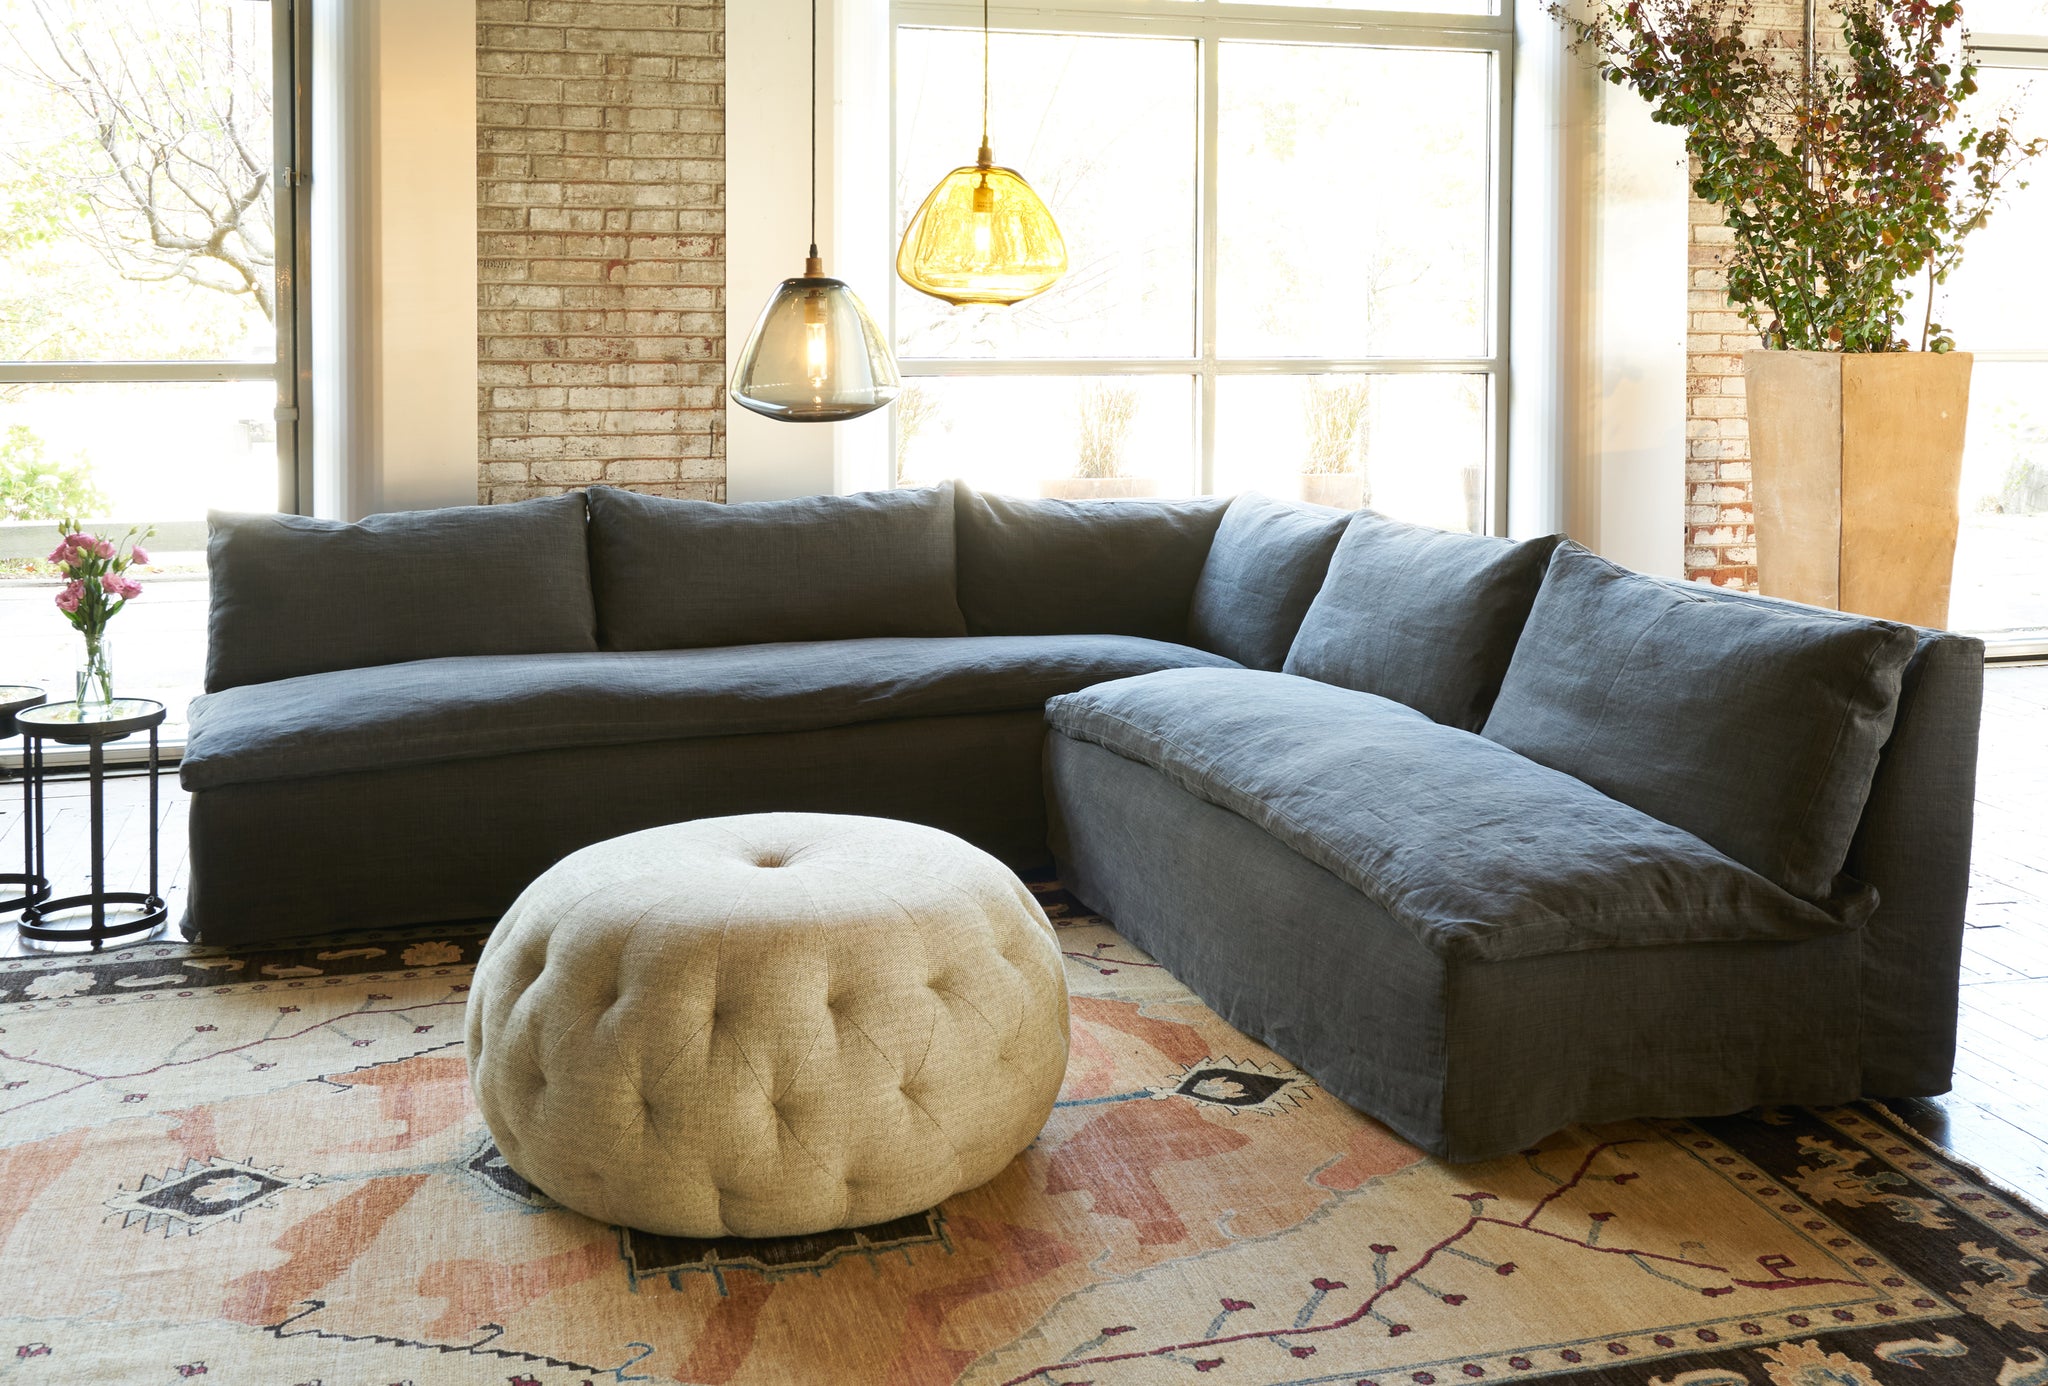  Black sectional with a pouf ottoman in front. Photographed in Rye Black. 